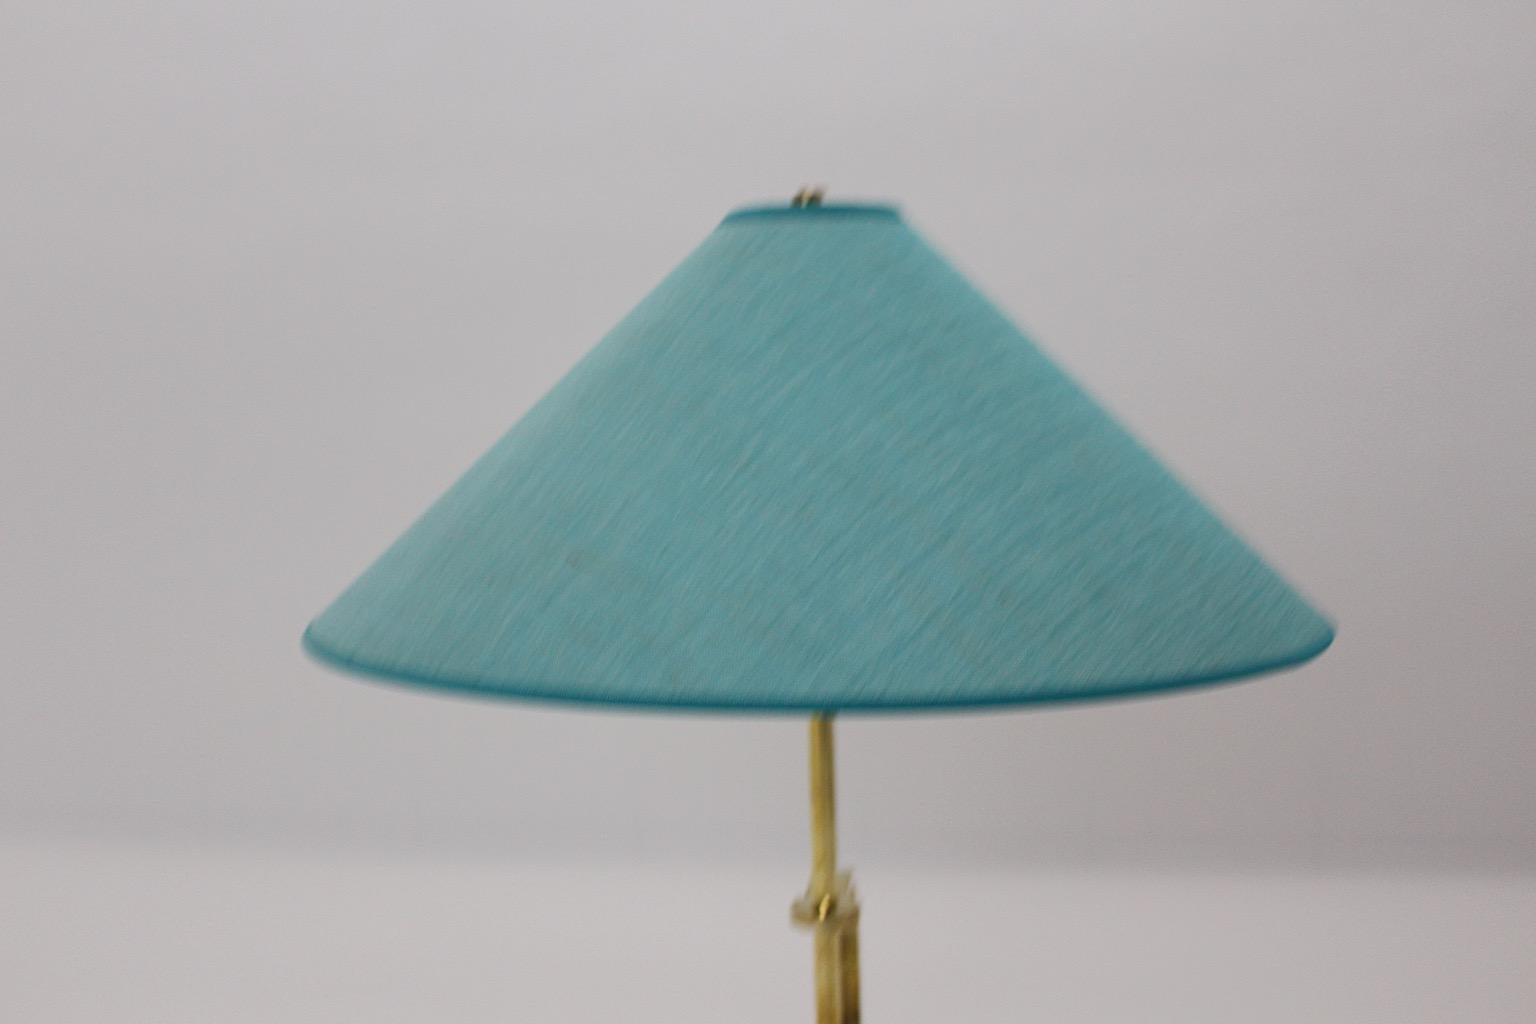 Art Deco Brass Vintage Table Lamp Blue Teal Textile Shade Vienna C 1925 For Sale 8